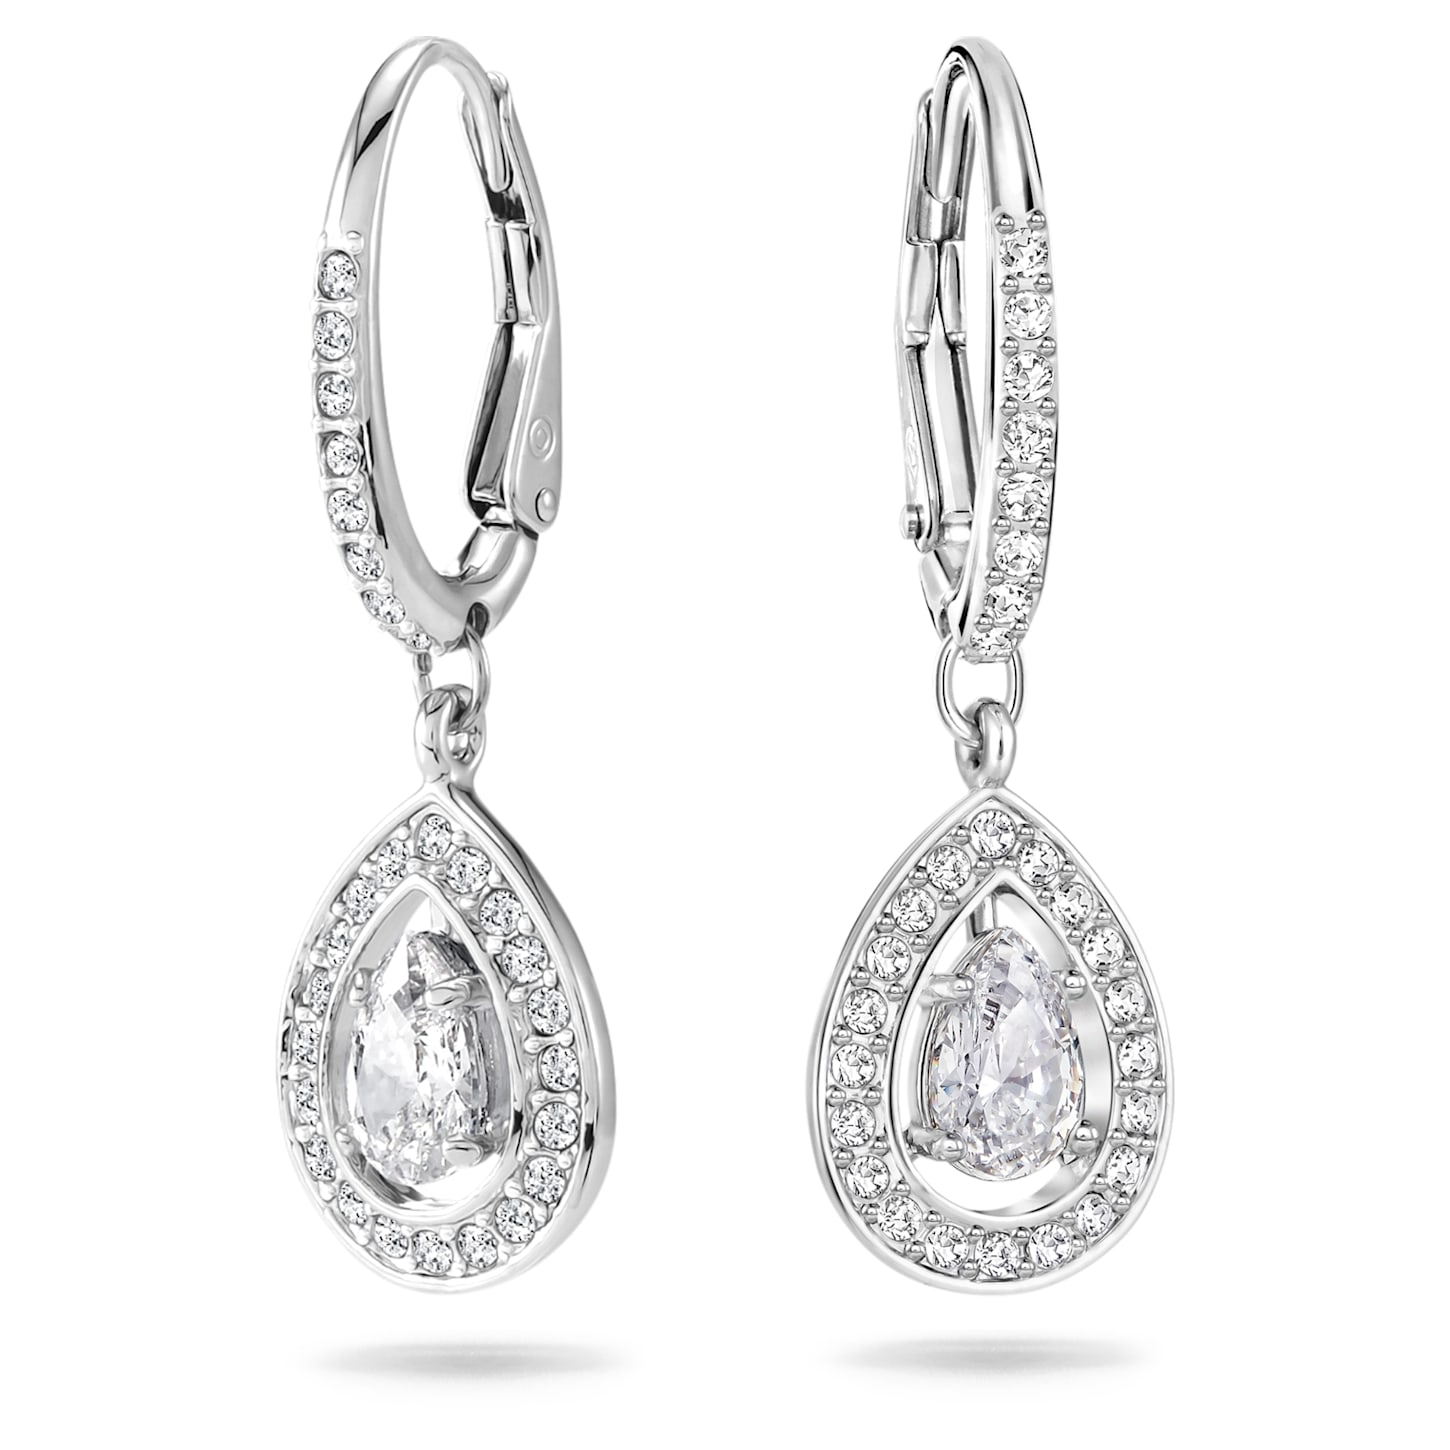 Ijver Lach galop Angelic earrings Pear cut crystal, White, Rhodium plated - VALO jewels